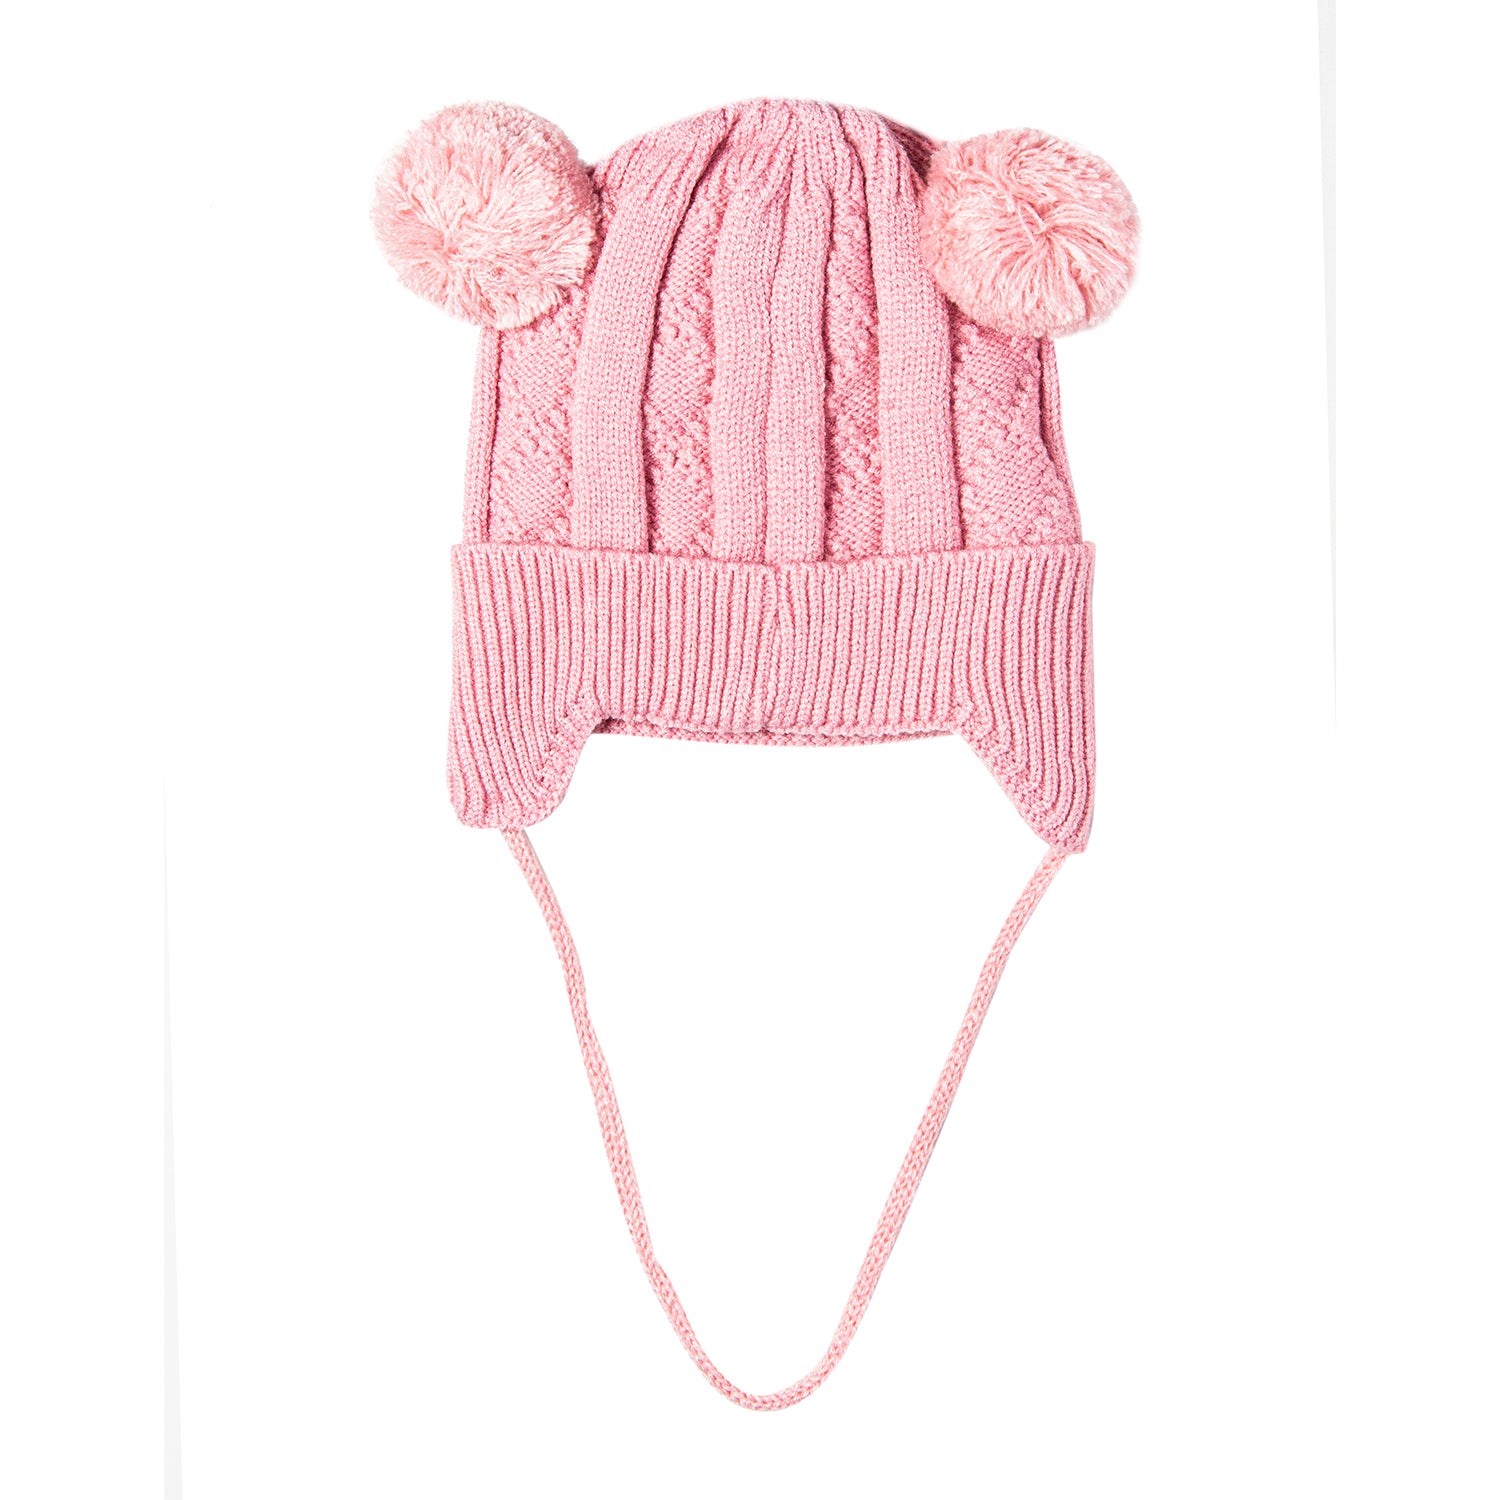 Baby Moo Knit Woollen Cap With Tie For Ear Cover Starry Pom Pom Pink